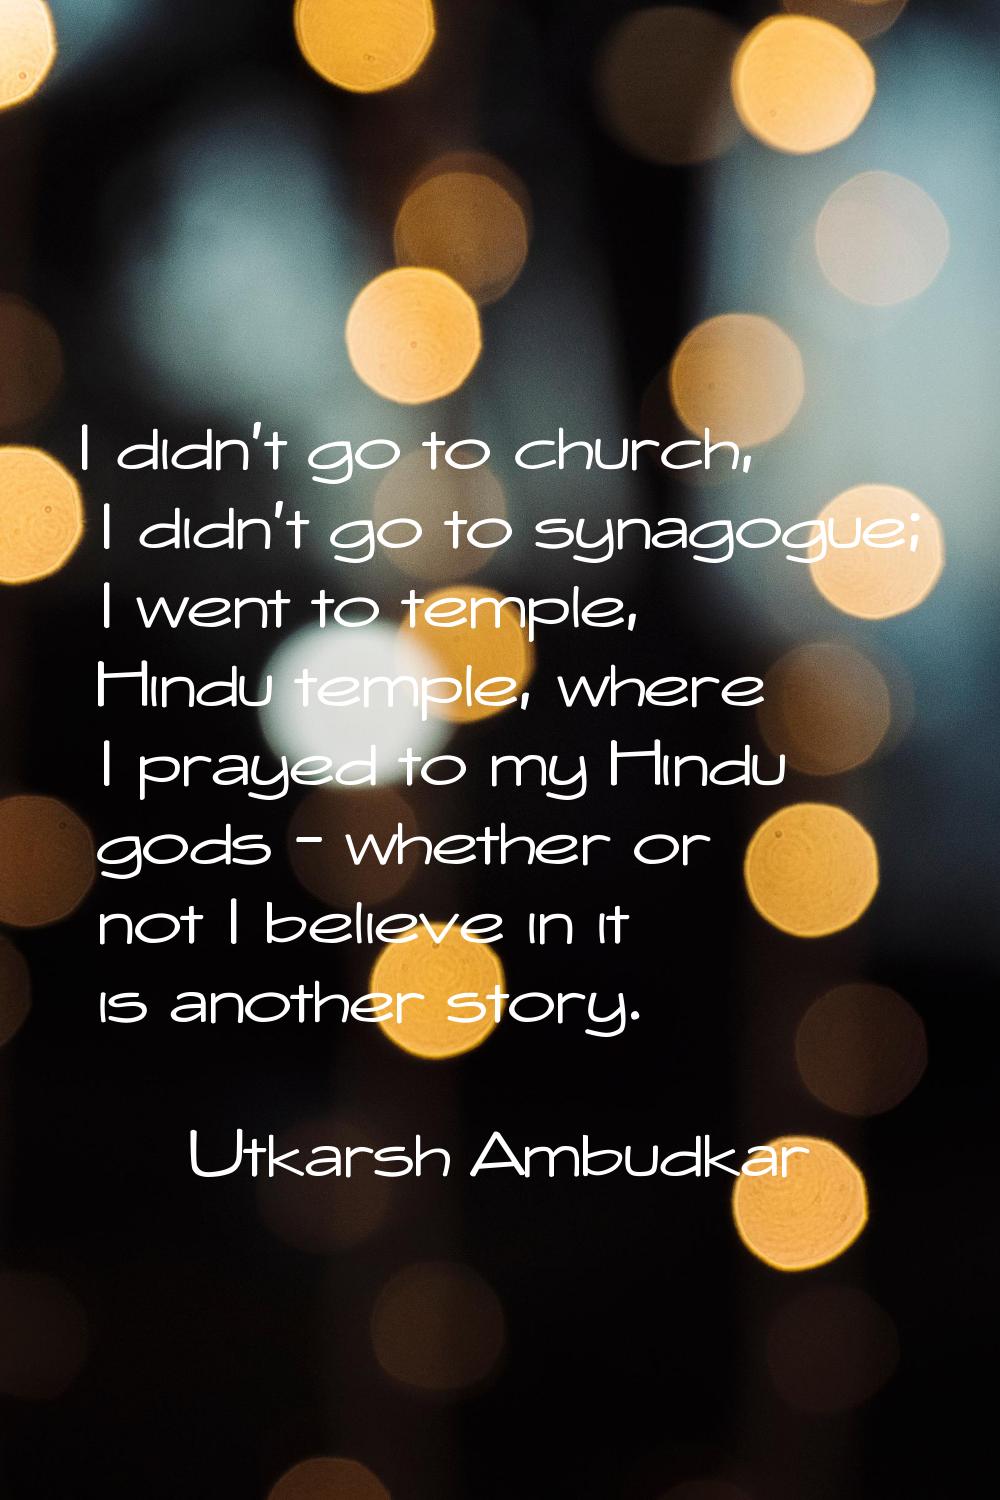 I didn't go to church, I didn't go to synagogue; I went to temple, Hindu temple, where I prayed to 